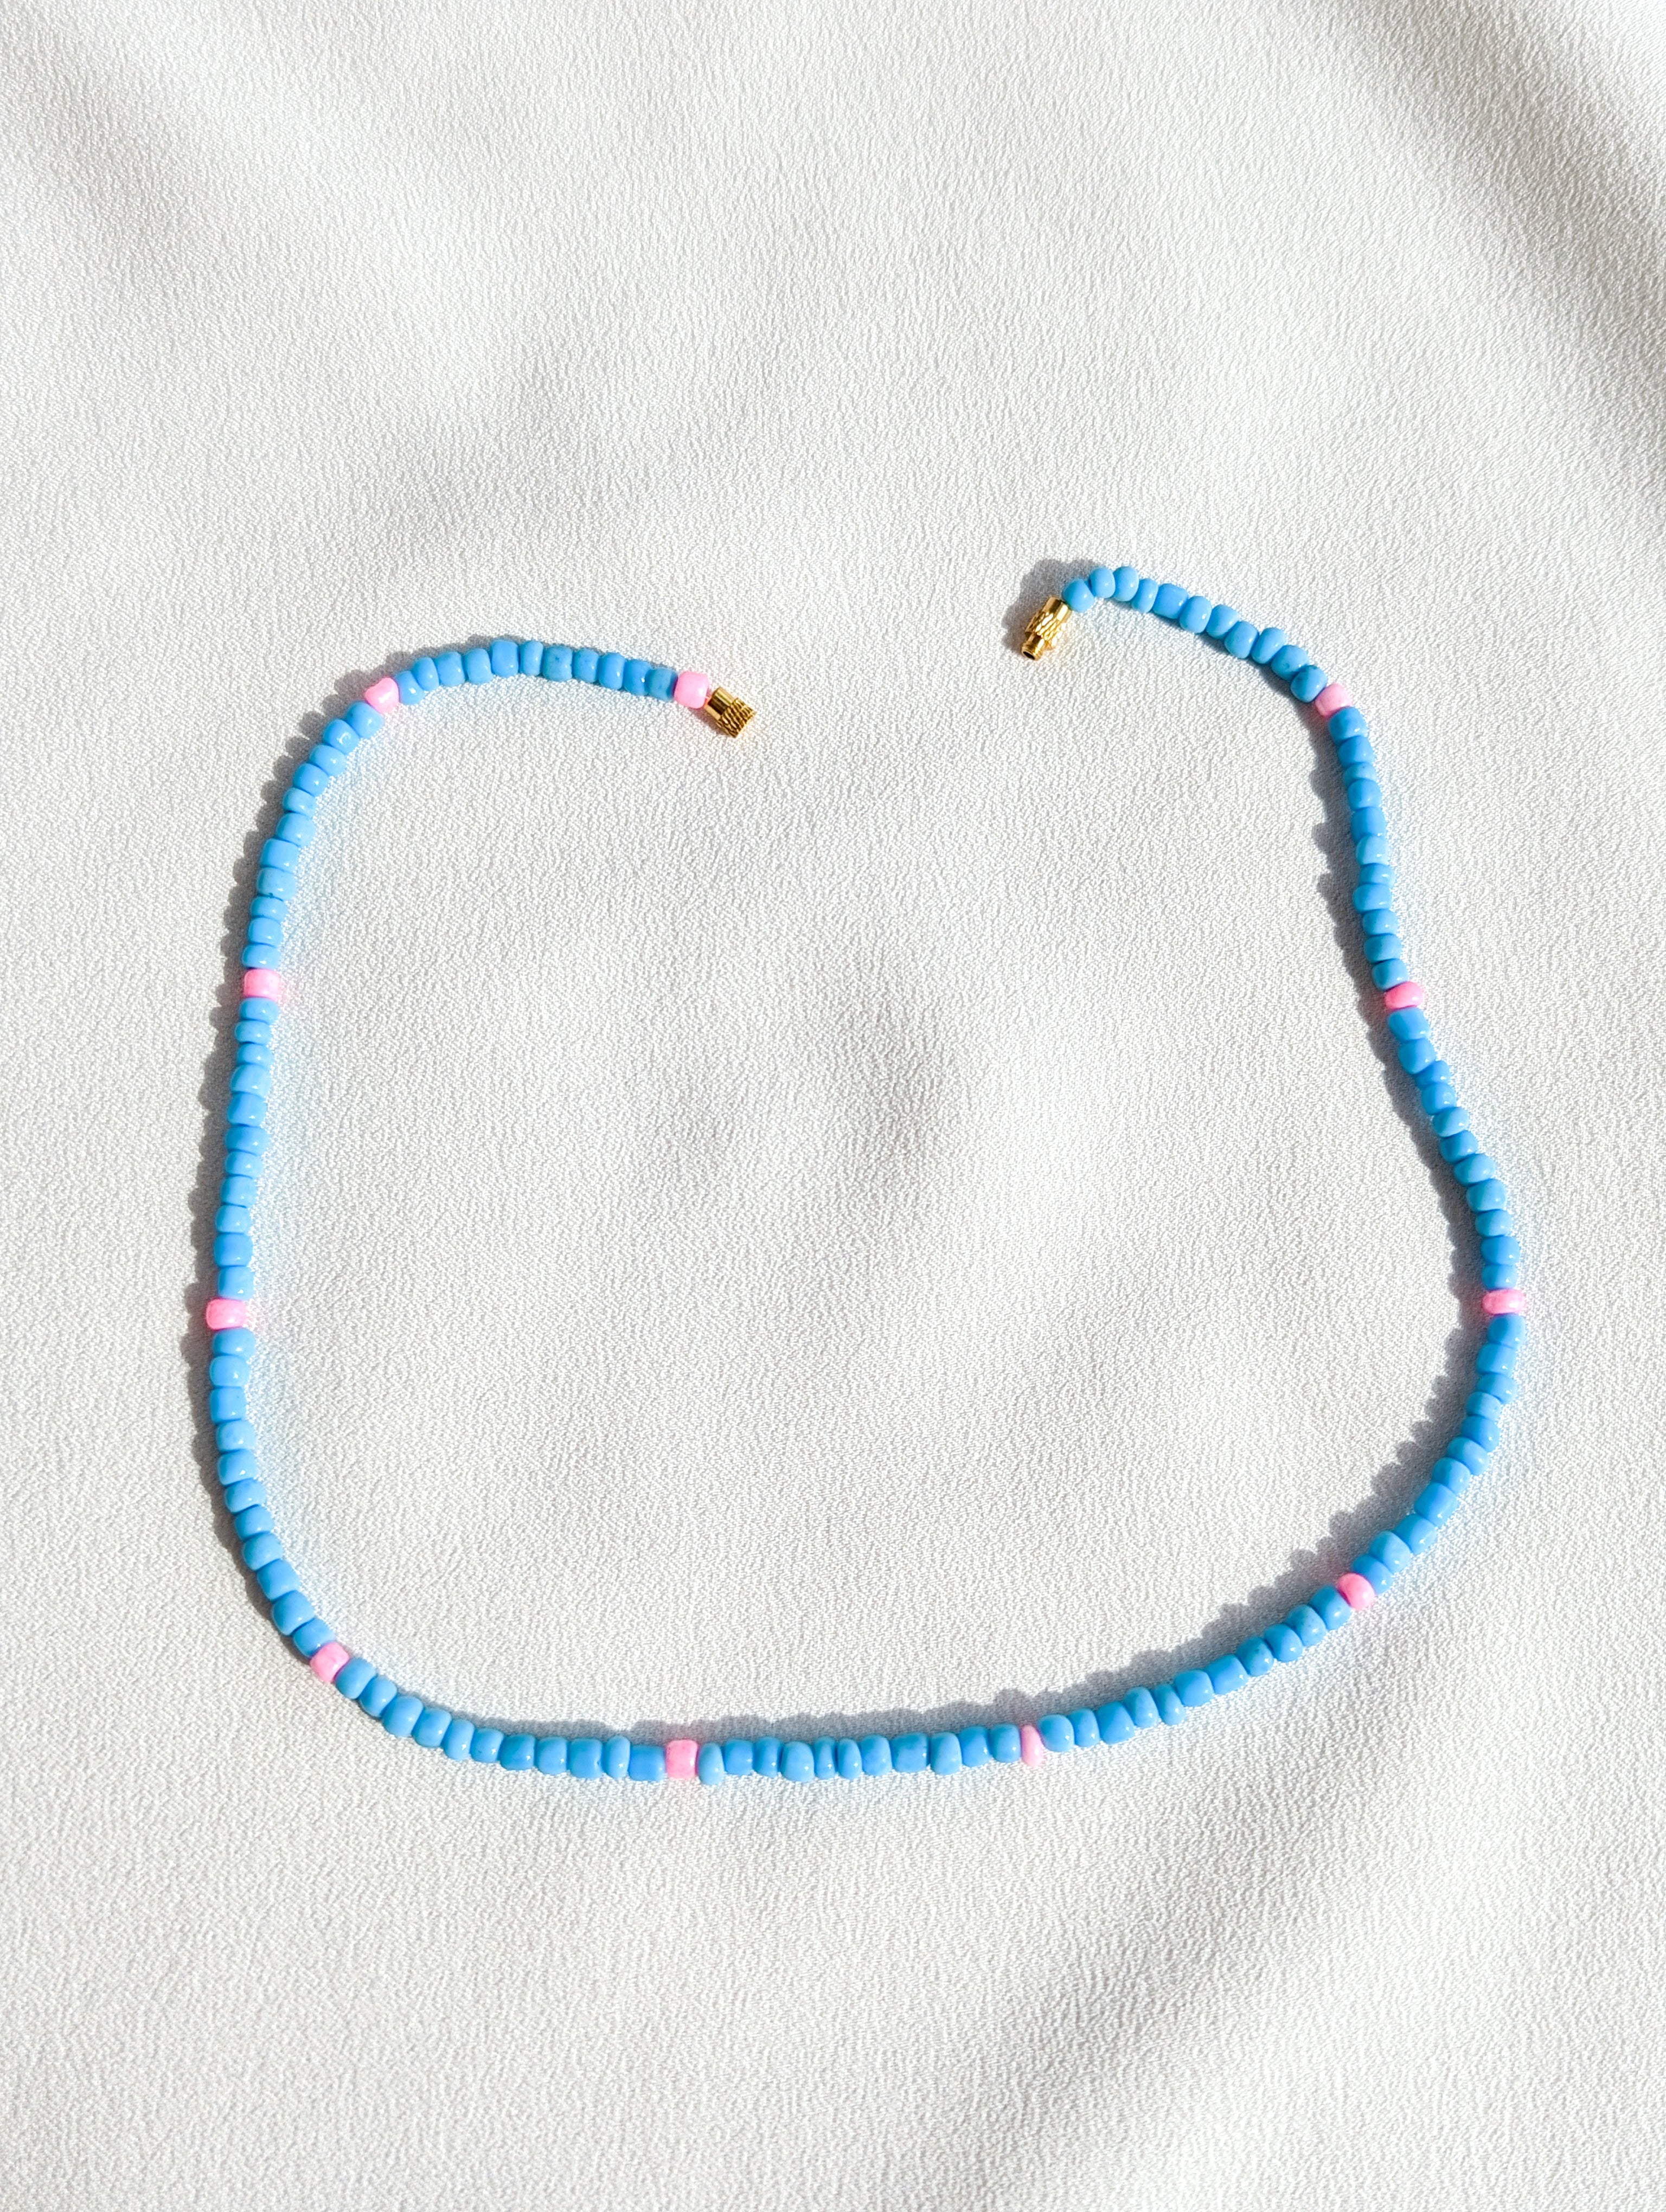 [THE ELEVEN] Necklace: Blue/Pink [Large Beads]